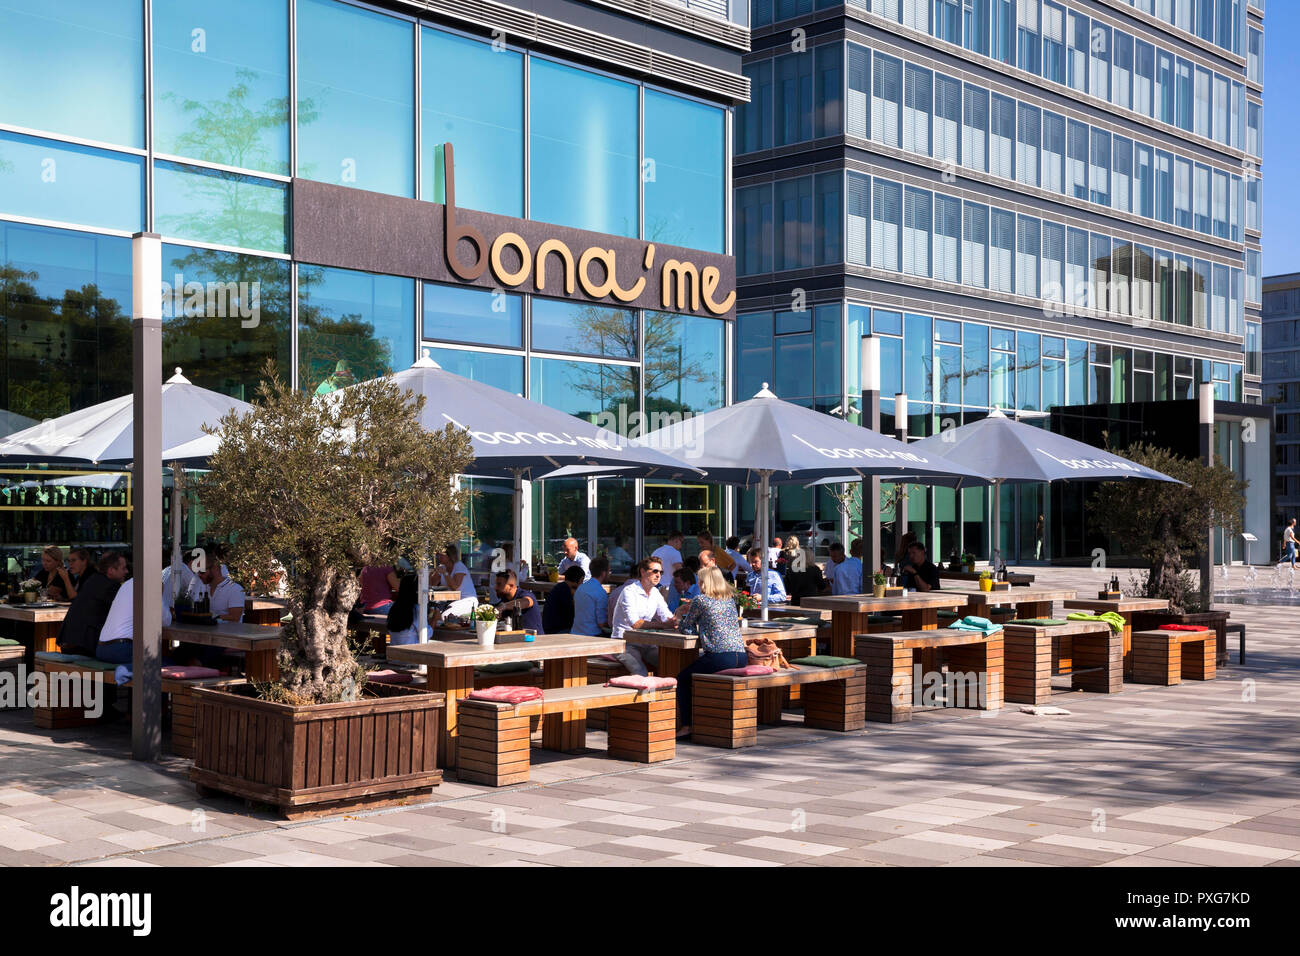 the restaurant bona´me at Kennedy square in the district Deutz, Cologne, Germany.  das Restaurant bona´me am Kennedyplatz in Deutz, Koeln, Deutschland Stock Photo